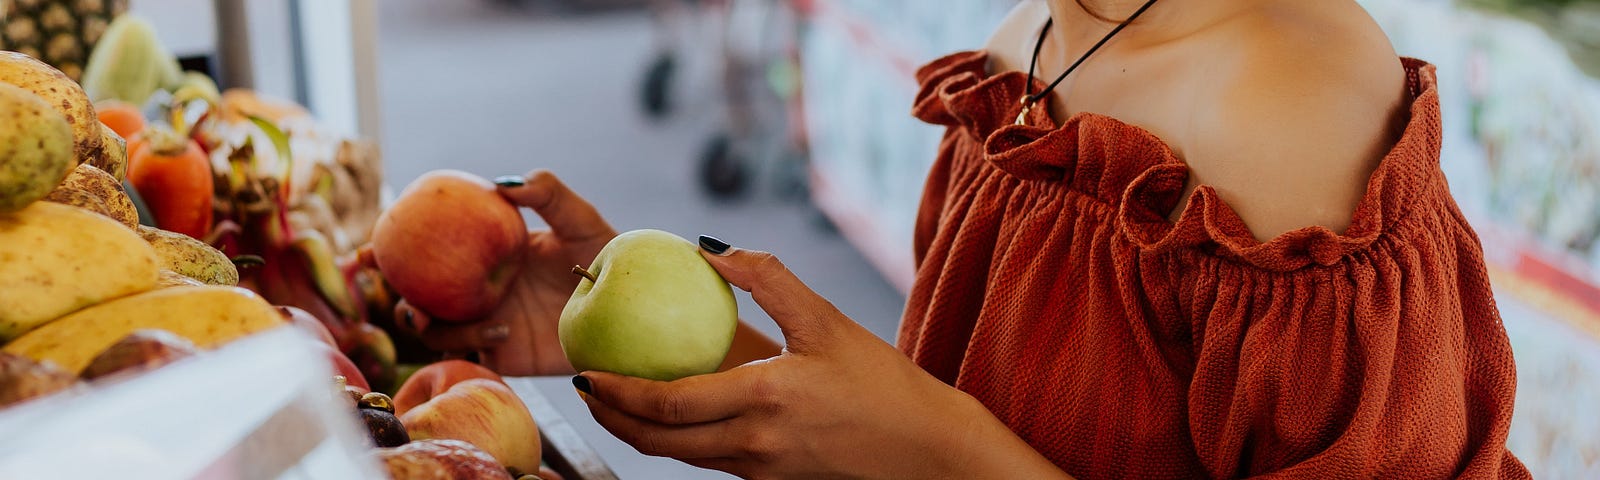 Young woman holding a green apple and an orange in the super market